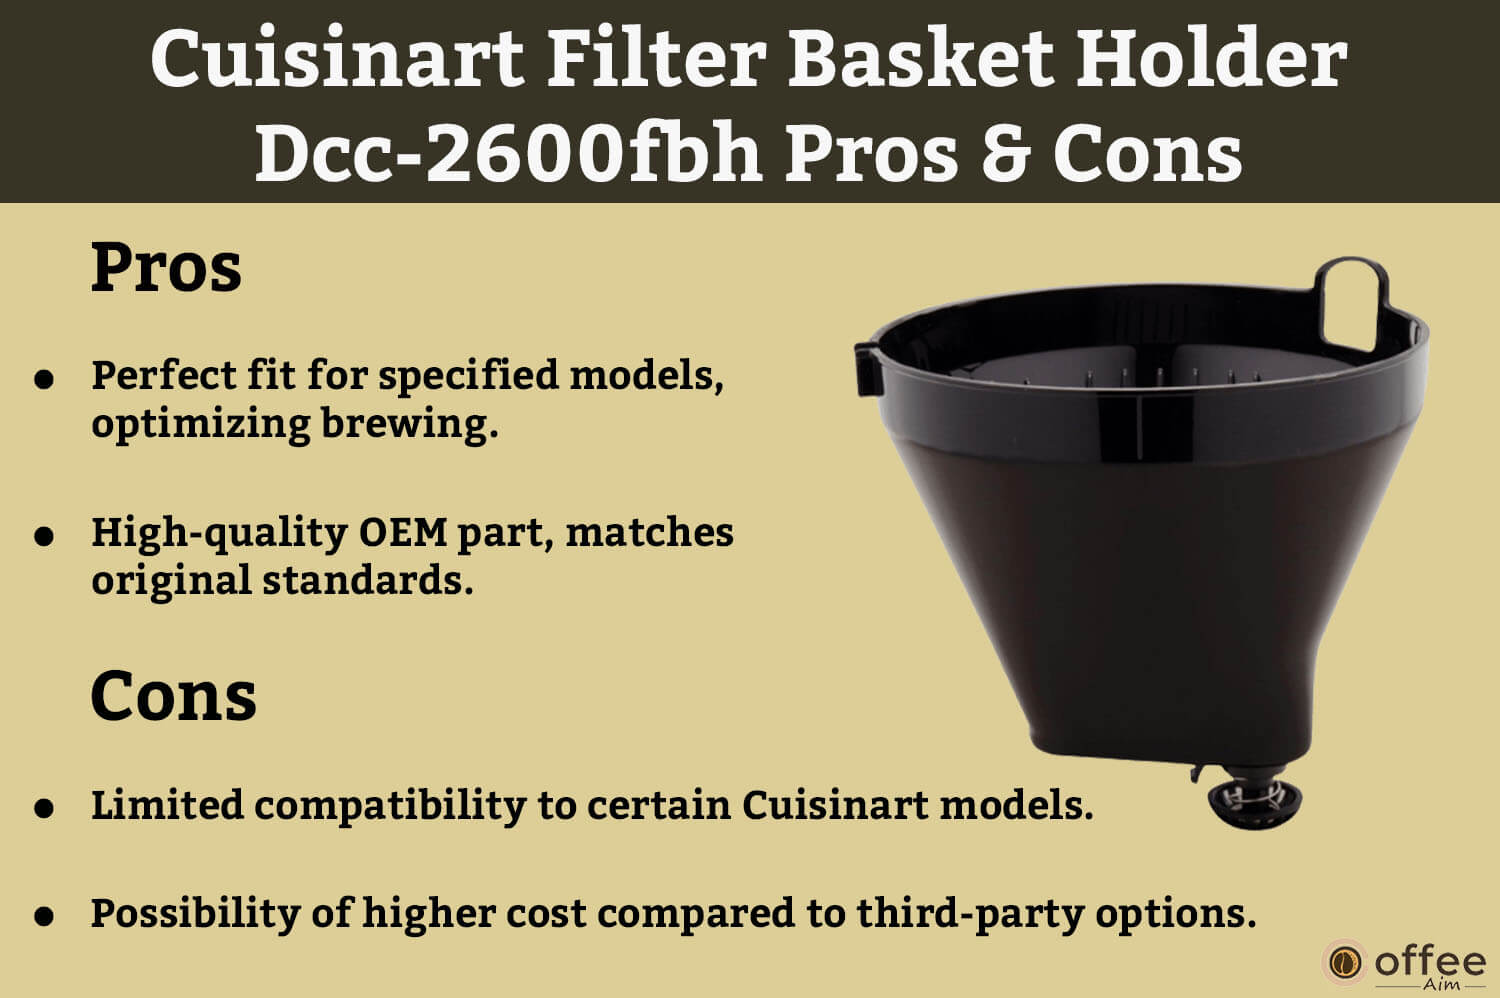 This image provides a comprehensive depiction of the advantages and disadvantages of the "DCC-2600FBH," enhancing the in-depth analysis within the article on the Cuisinart Filter Basket.